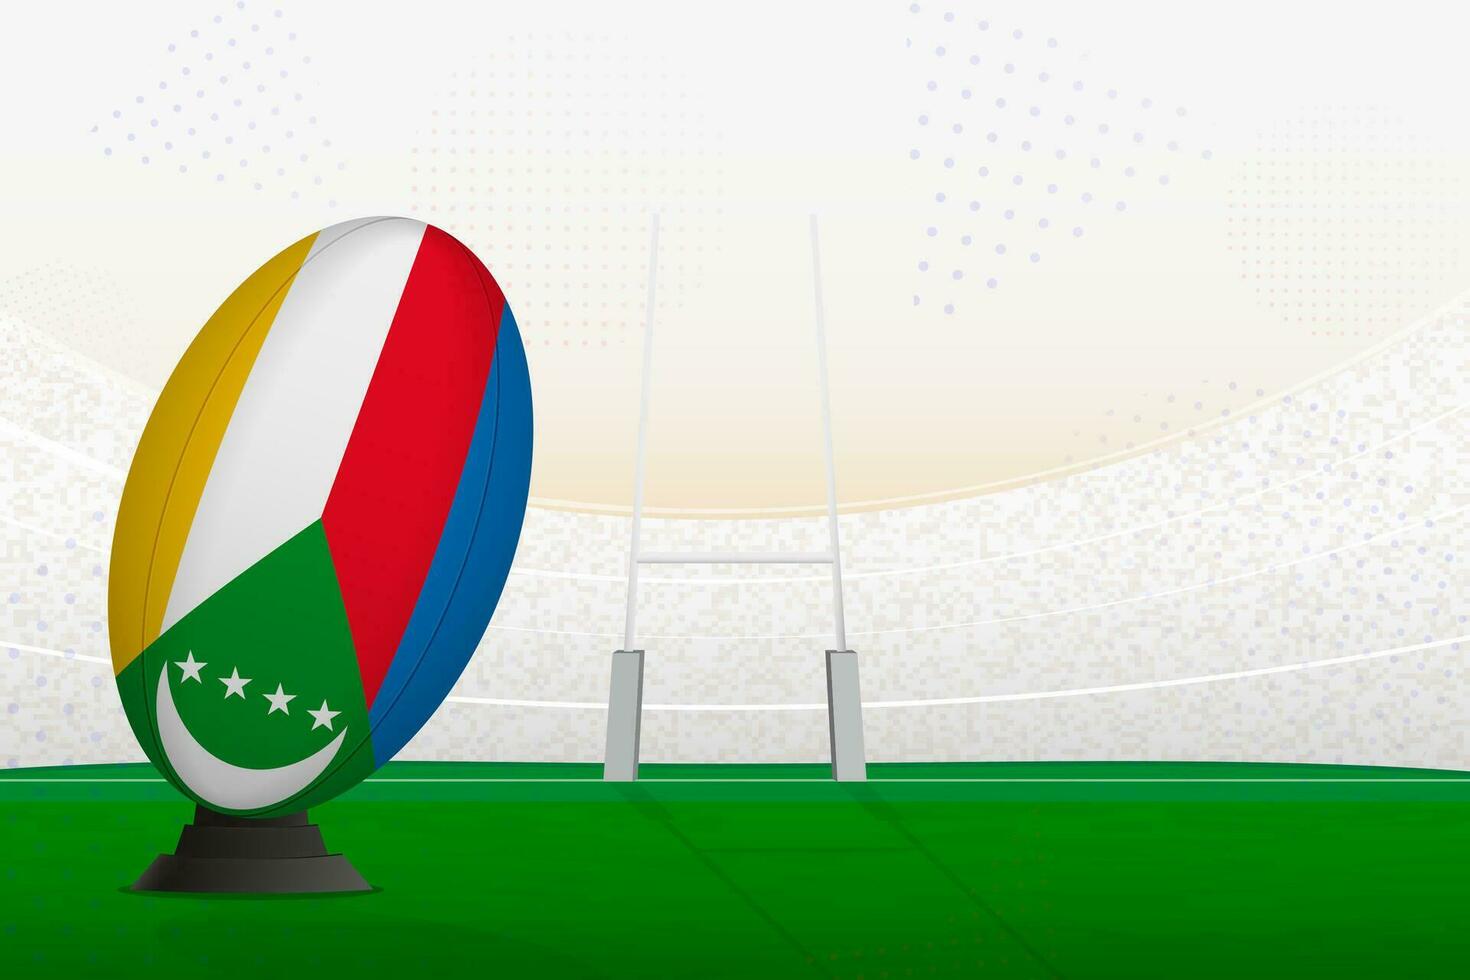 Comoros national team rugby ball on rugby stadium and goal posts, preparing for a penalty or free kick. vector